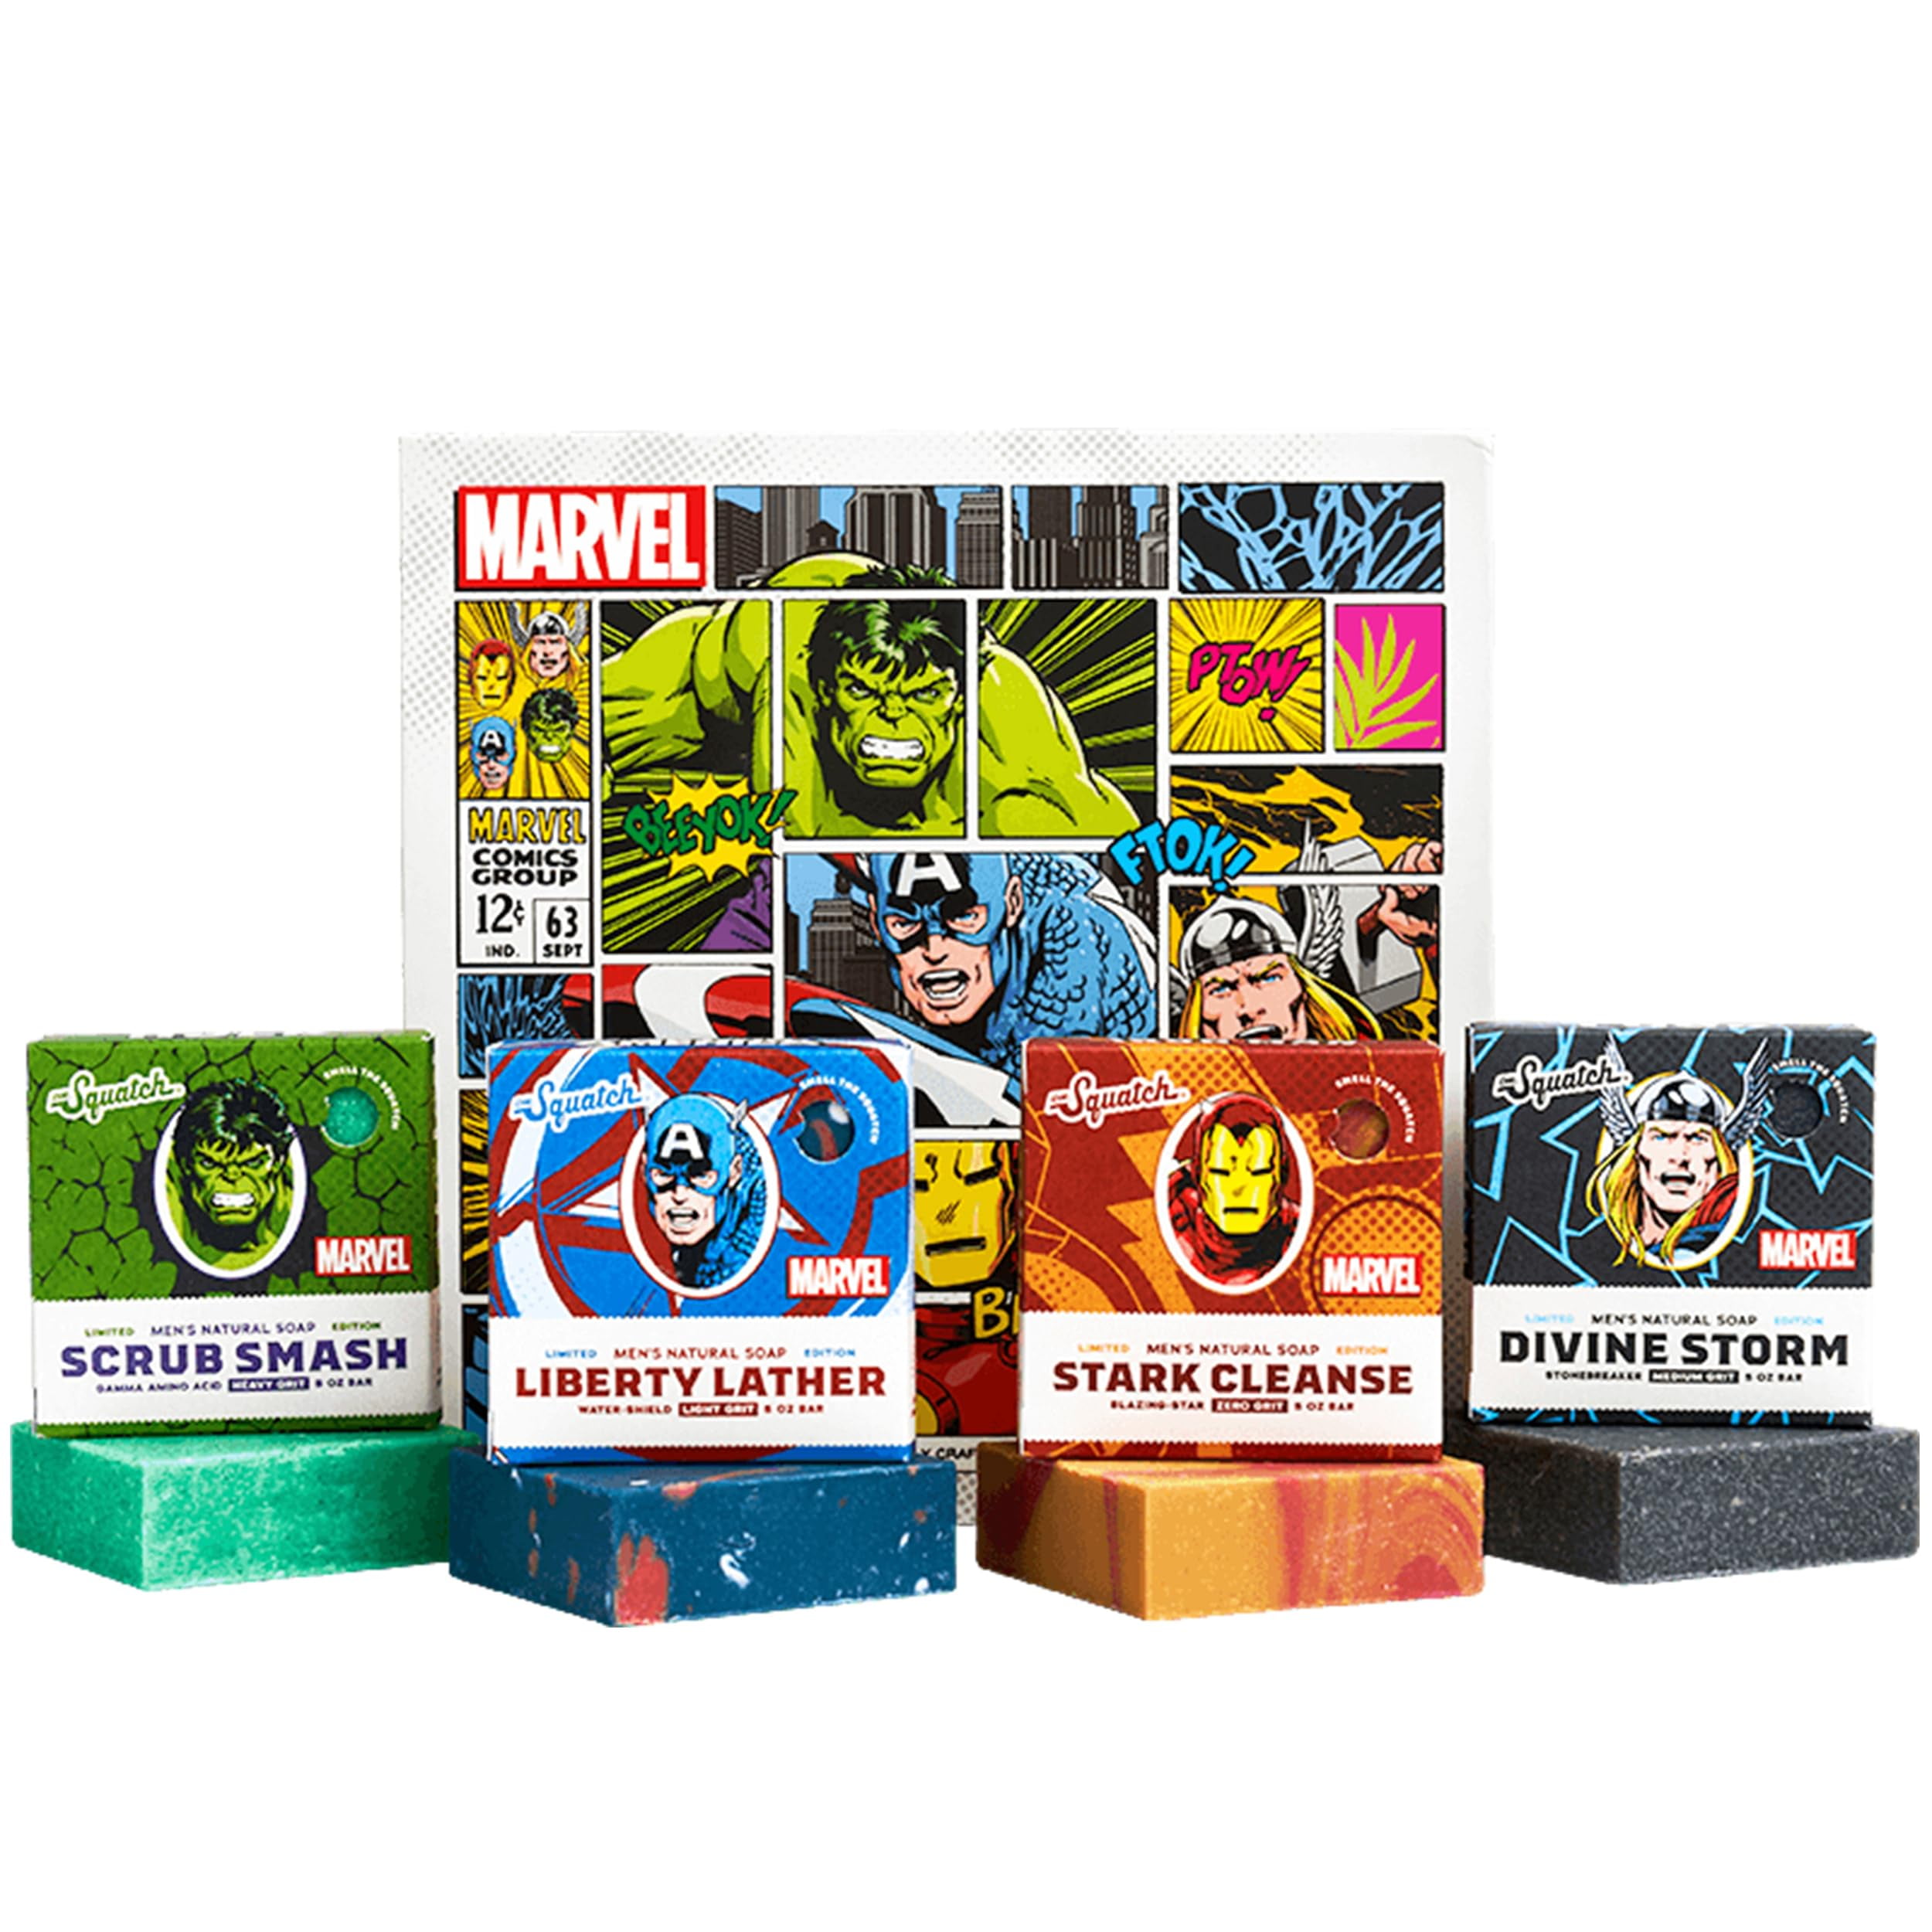  Dr. Squatch Limited Edition Soap Star Wars Soap Collection II  - Men's All Natural Bar Soap - 4 Bar Soap Bundle : Beauty & Personal Care